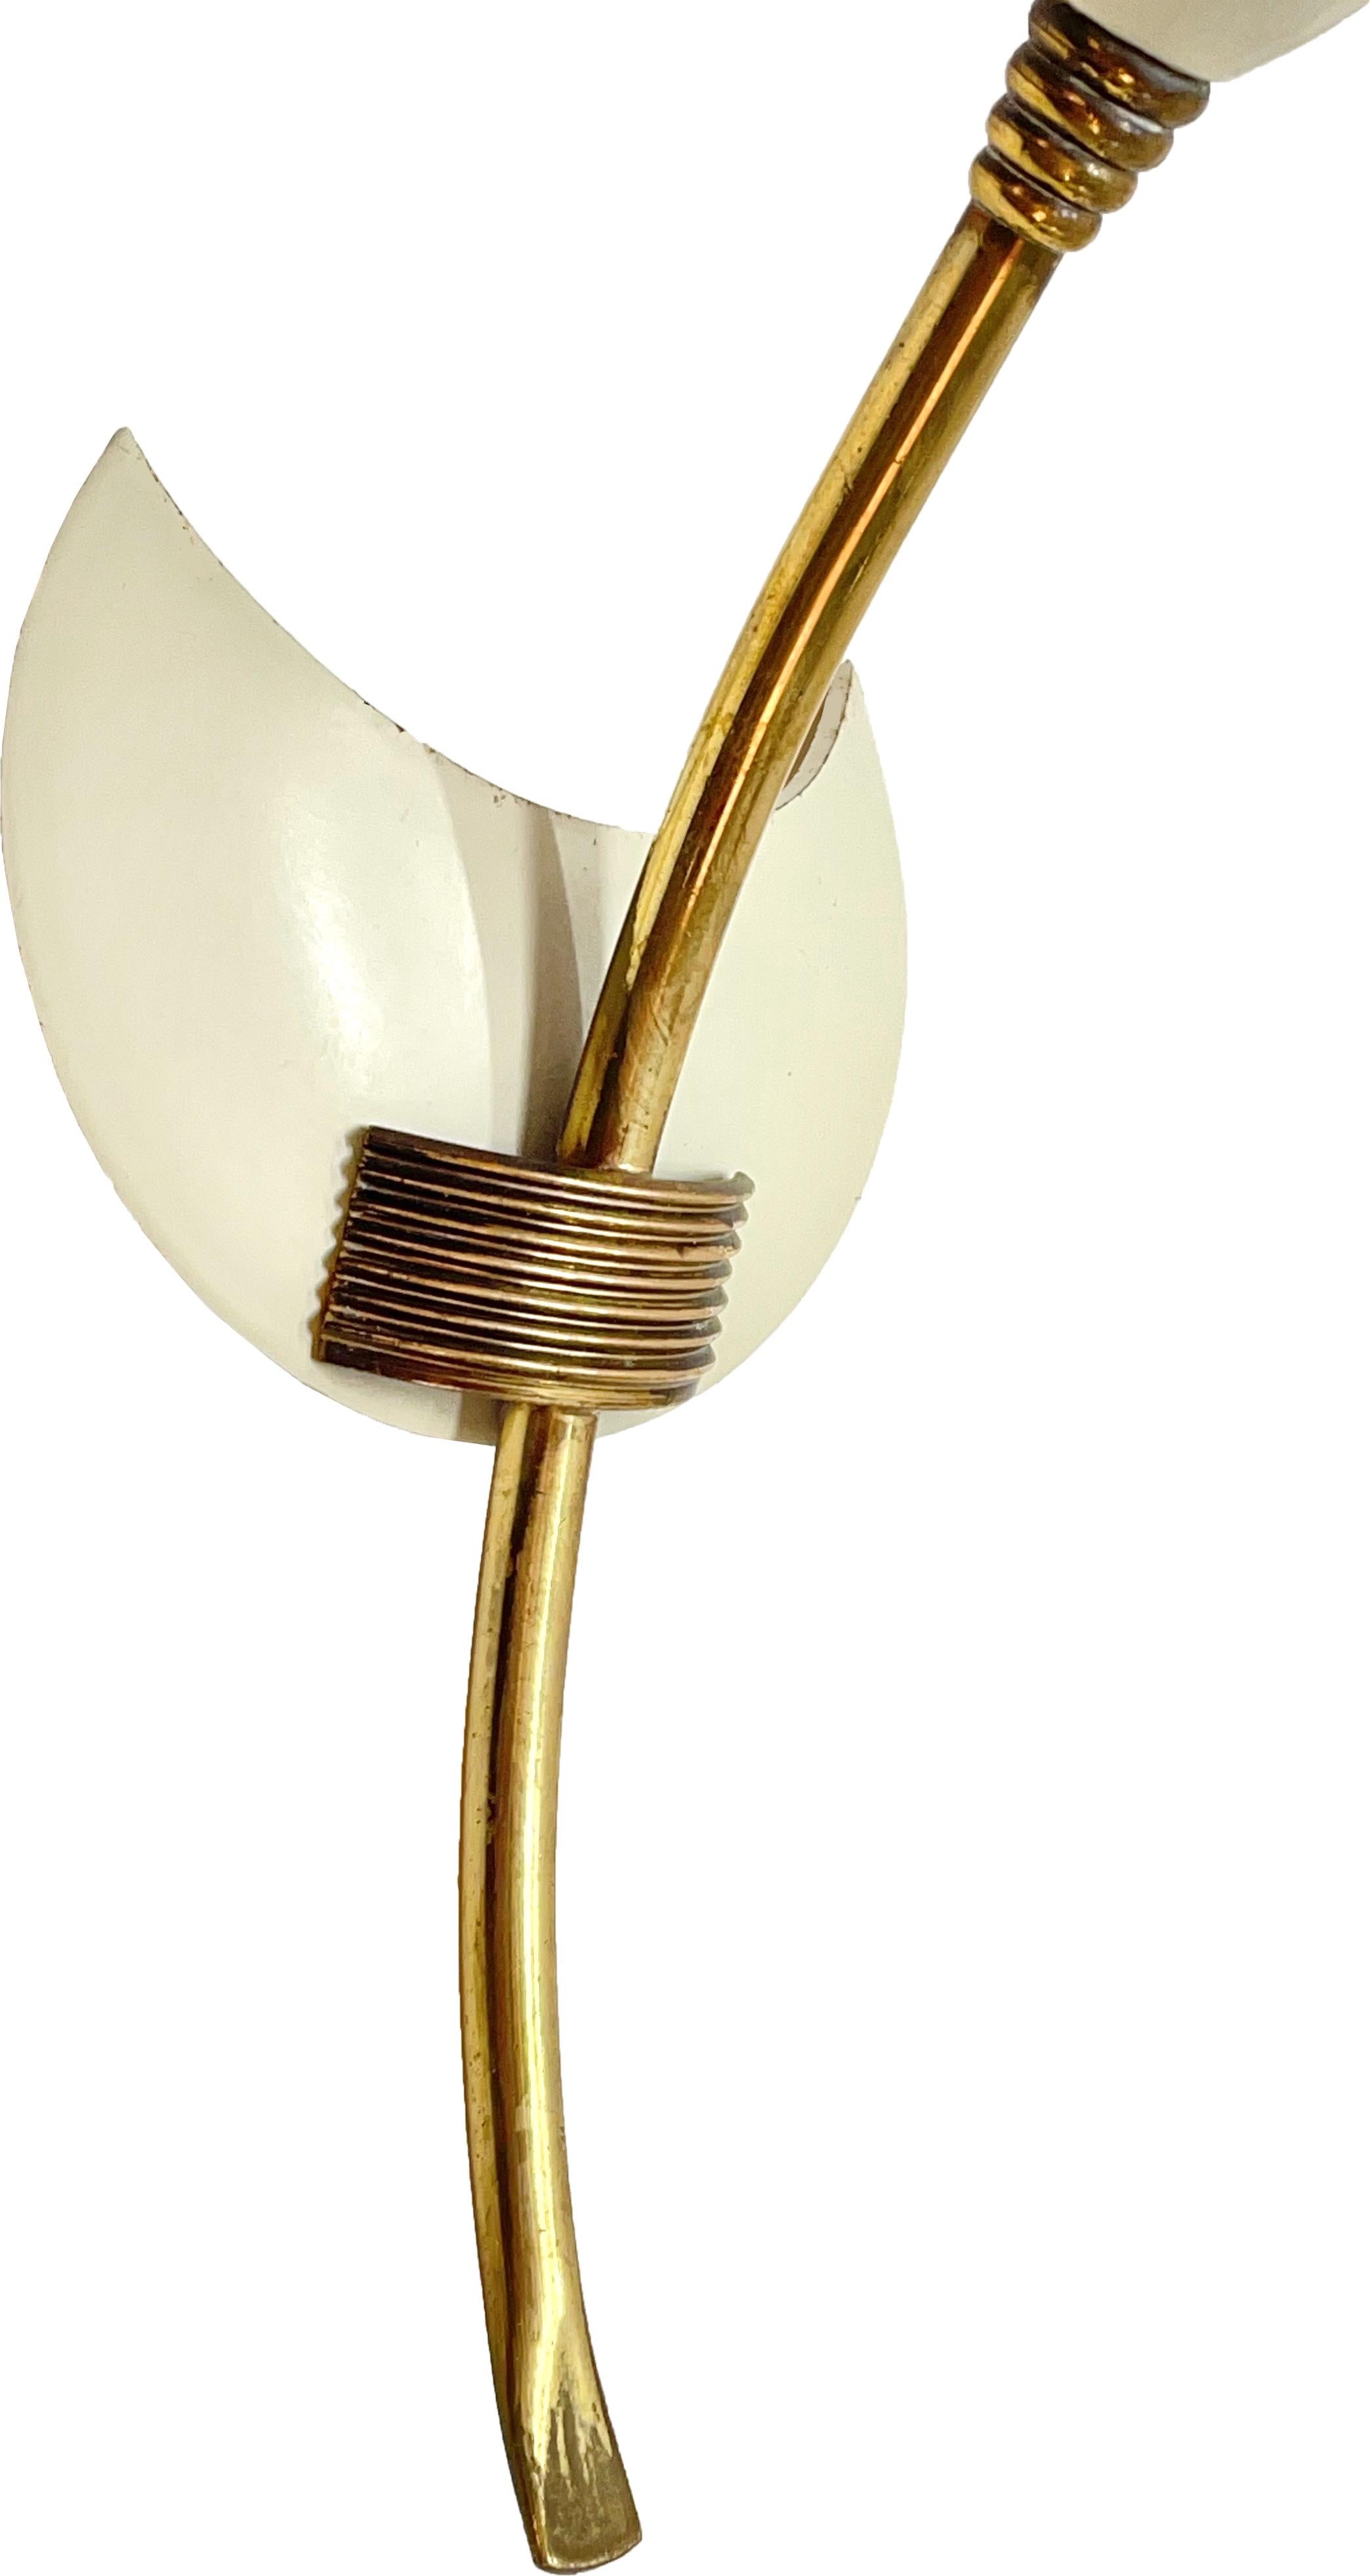 Pair of GCME Midcentury Brass and Enamelled Aluminum Italian Tulip Sconces 1950s For Sale 13